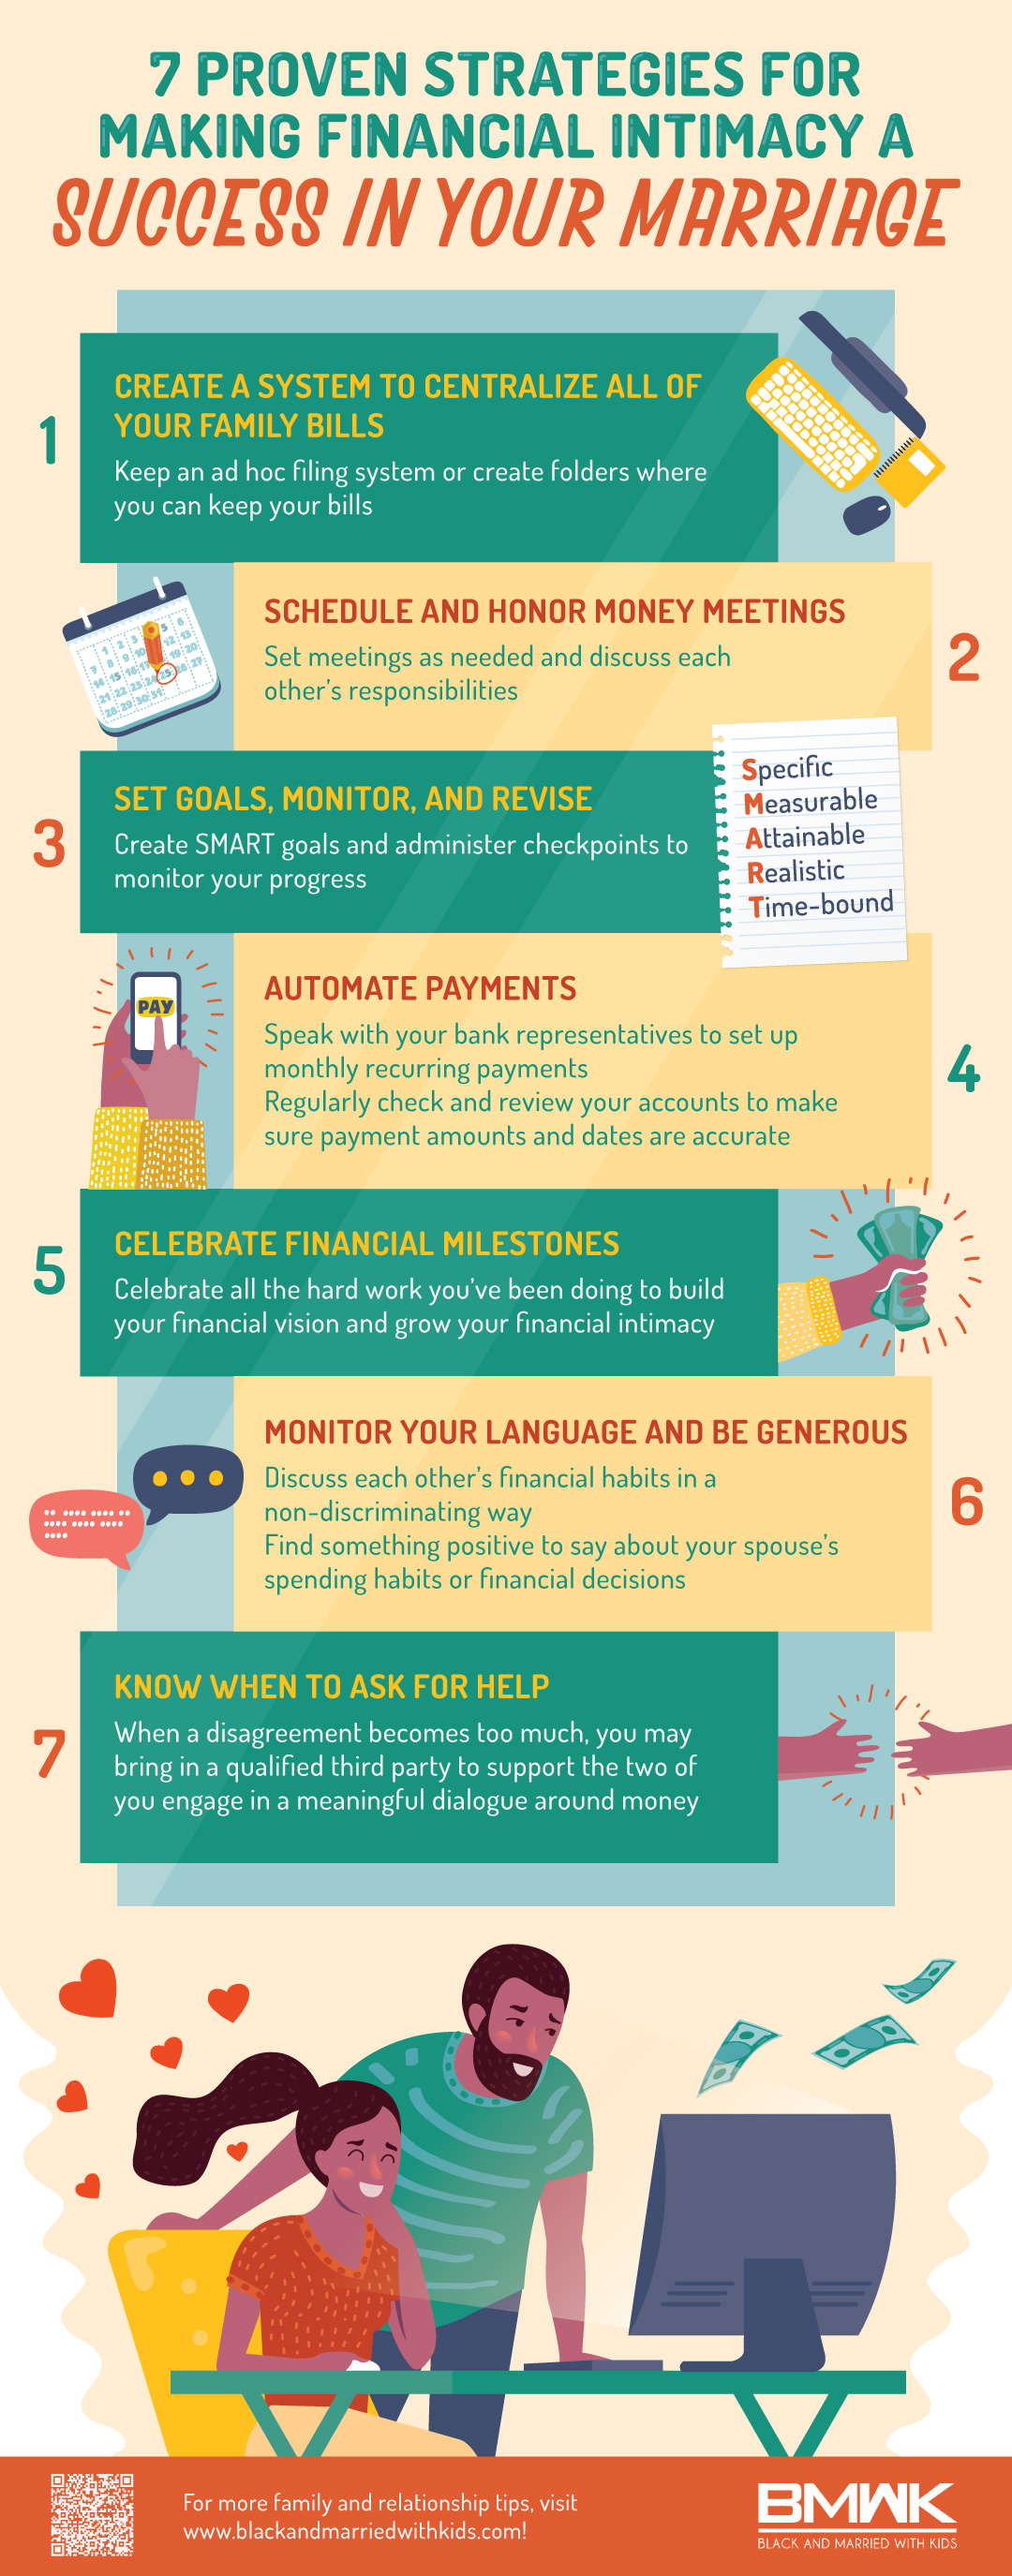 infographic | 7 Proven Strategies For Making Financial Intimacy a Success in Your Marriage